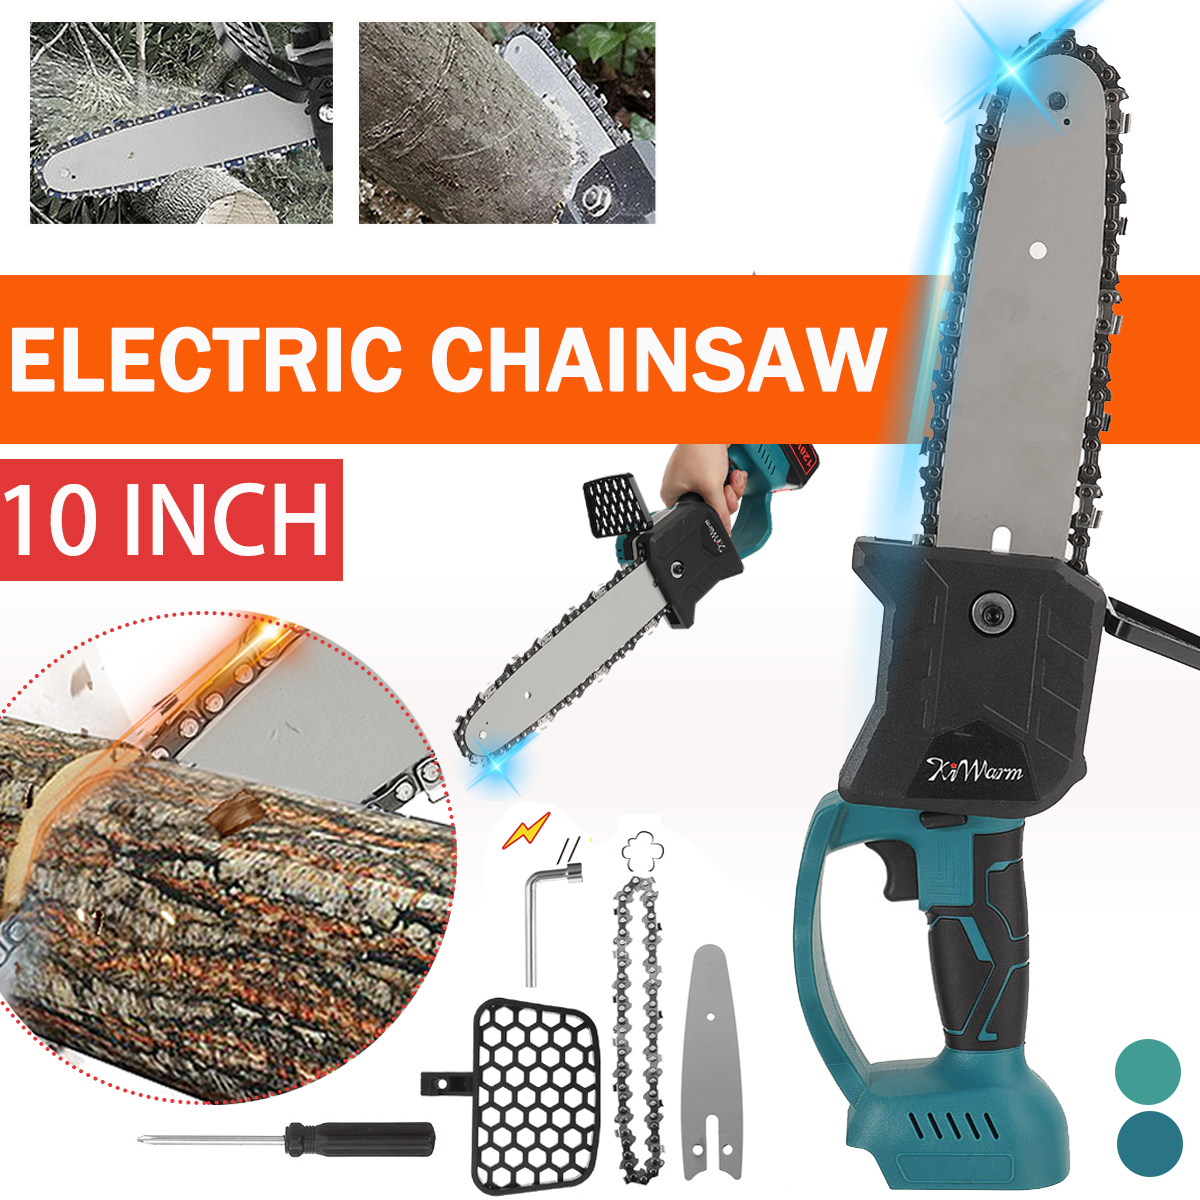 KIWARM-10-Inch-Portable-Electric-Saw-Pruning-Chain-Saw-Rechargeable-Woodworking-Power-Tools-Wood-Cut-1918536-2